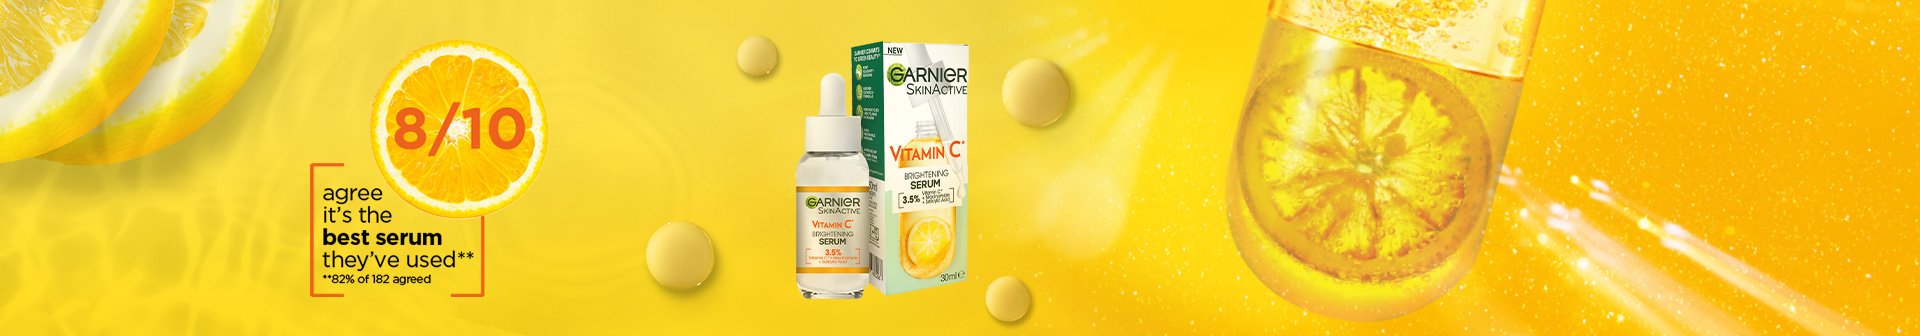 Vitamin C product on yellow background with lemon images